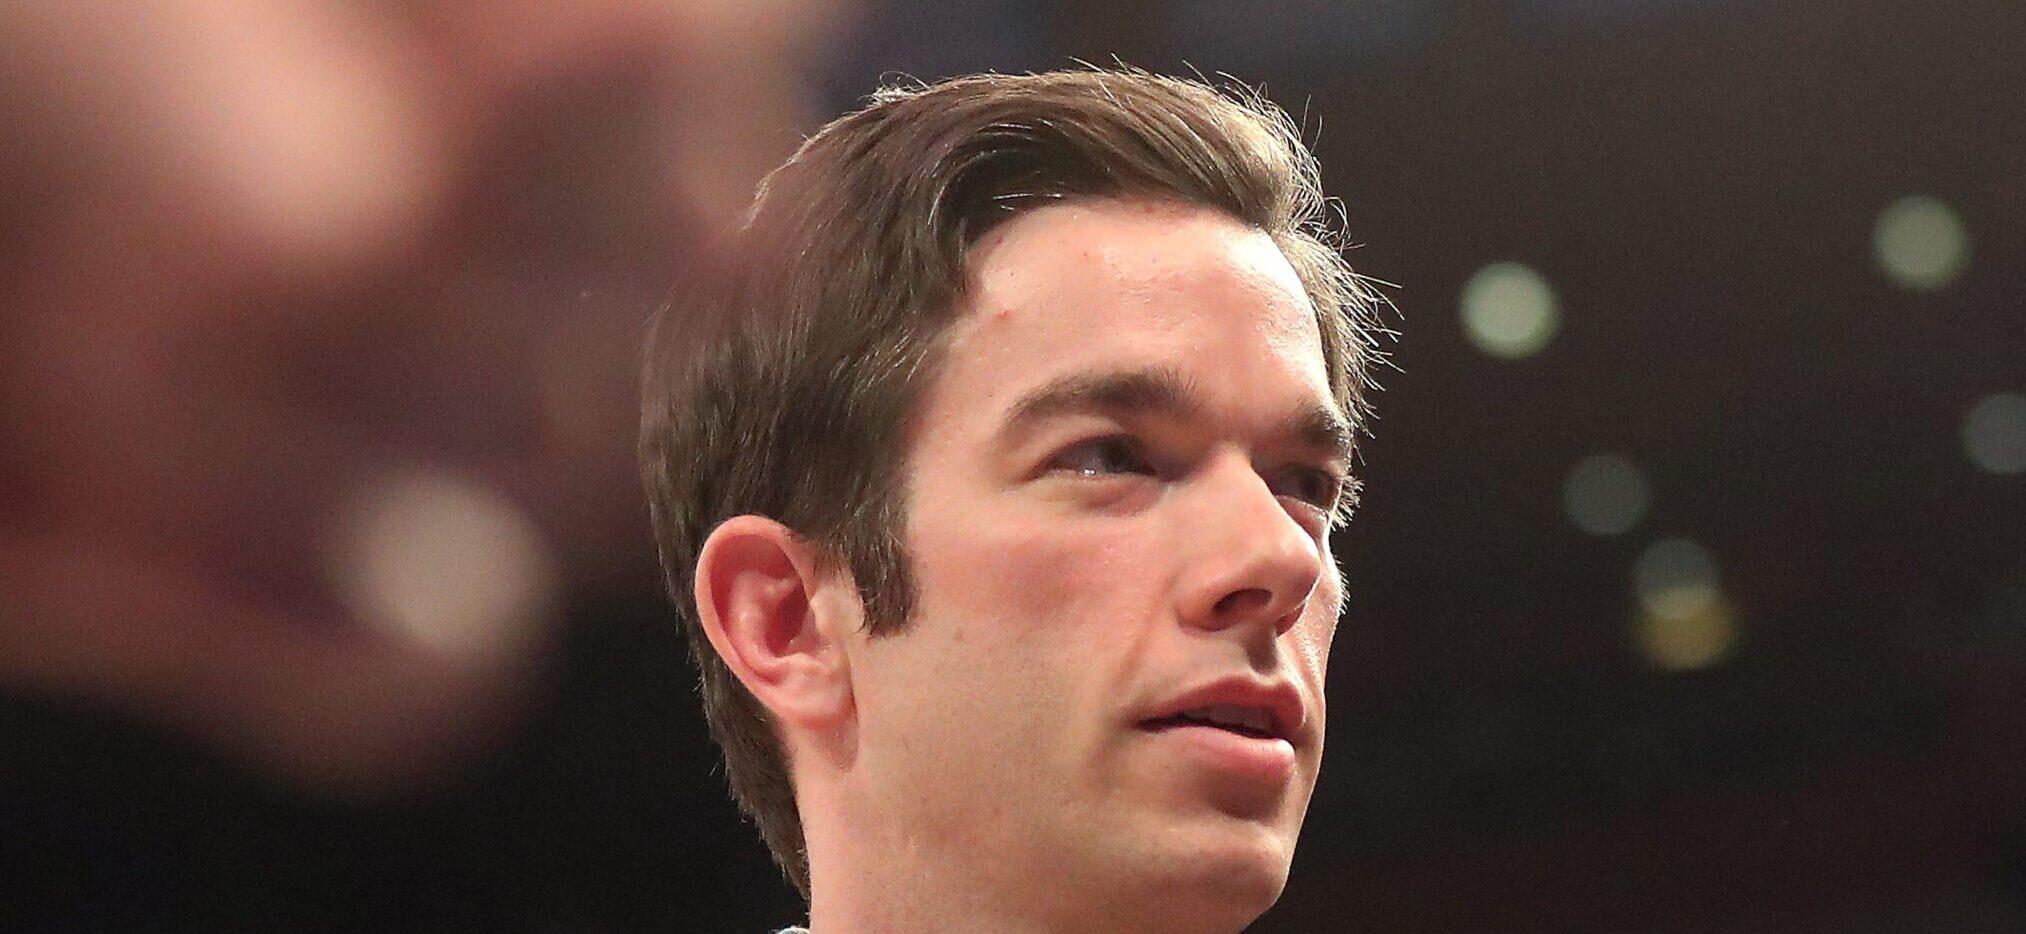 John Mulaney’s New Netflix Special Tackles The Comedian’s Tumultuous Personal Struggles